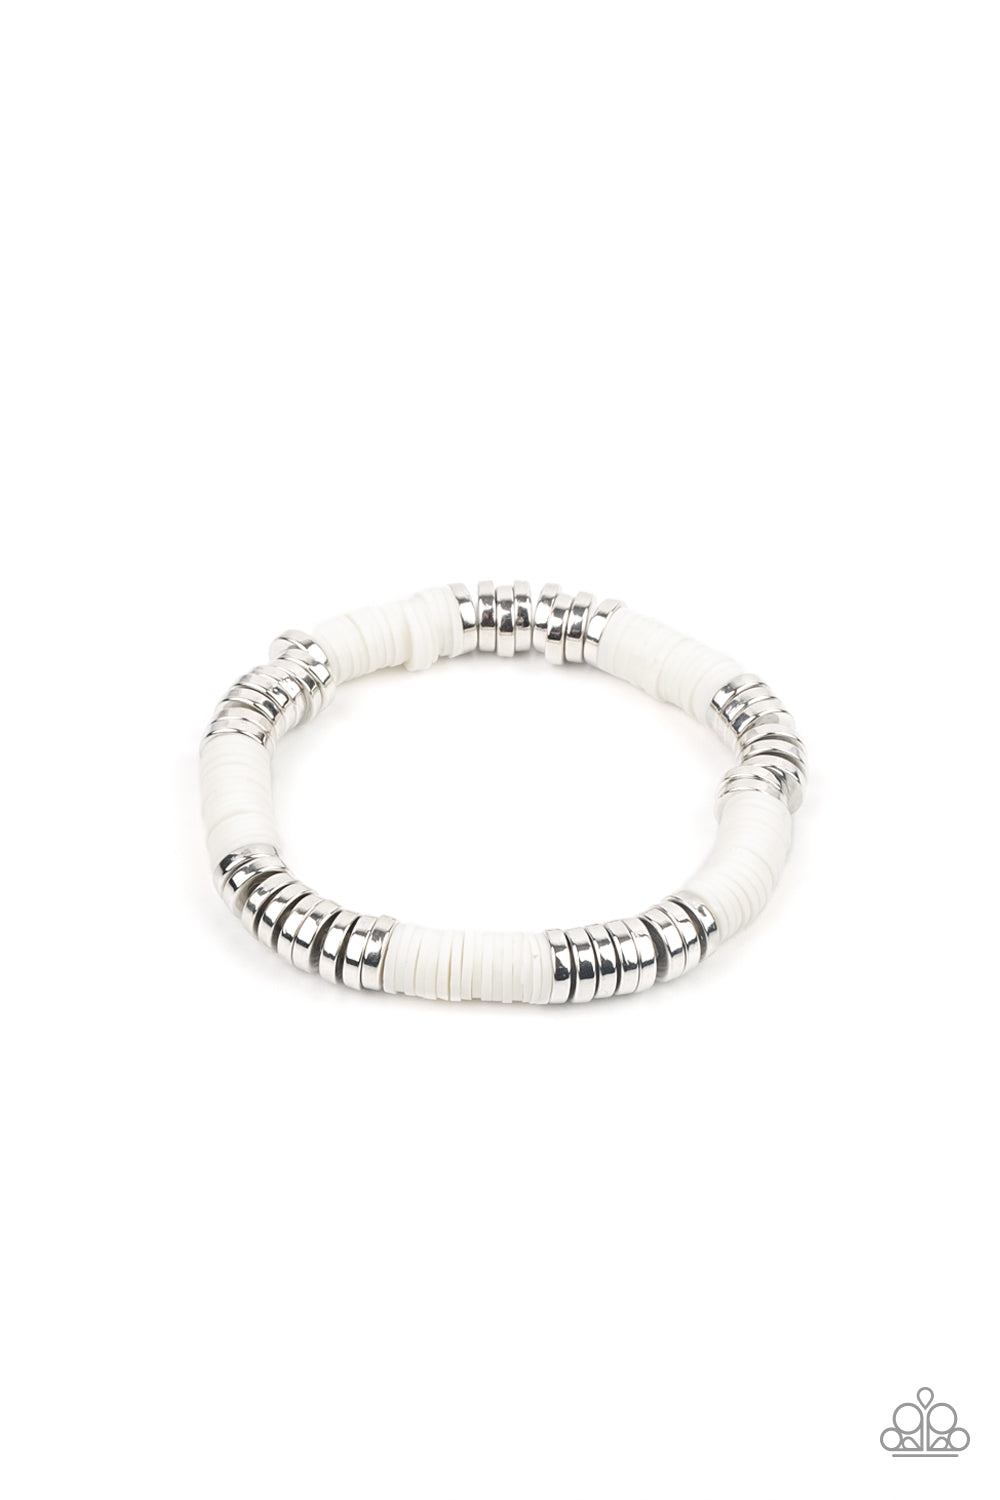 Paparazzi Accessories Stacked in Your Favor - White Bracelets - Lady T Accessories